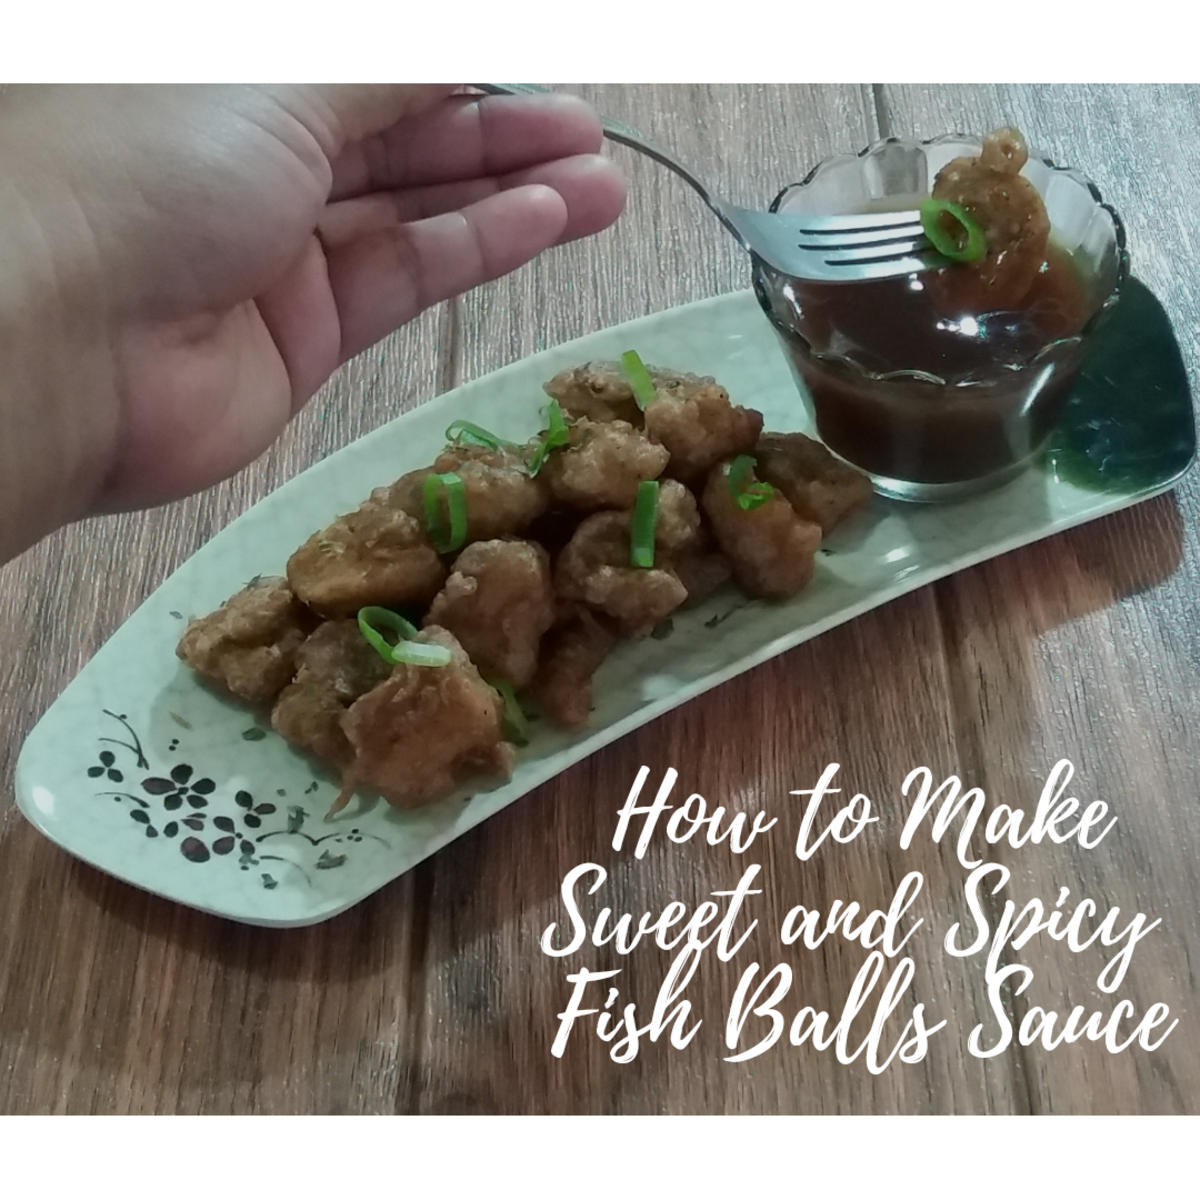 How to Make Sweet and Spicy Fish Ball Sauce